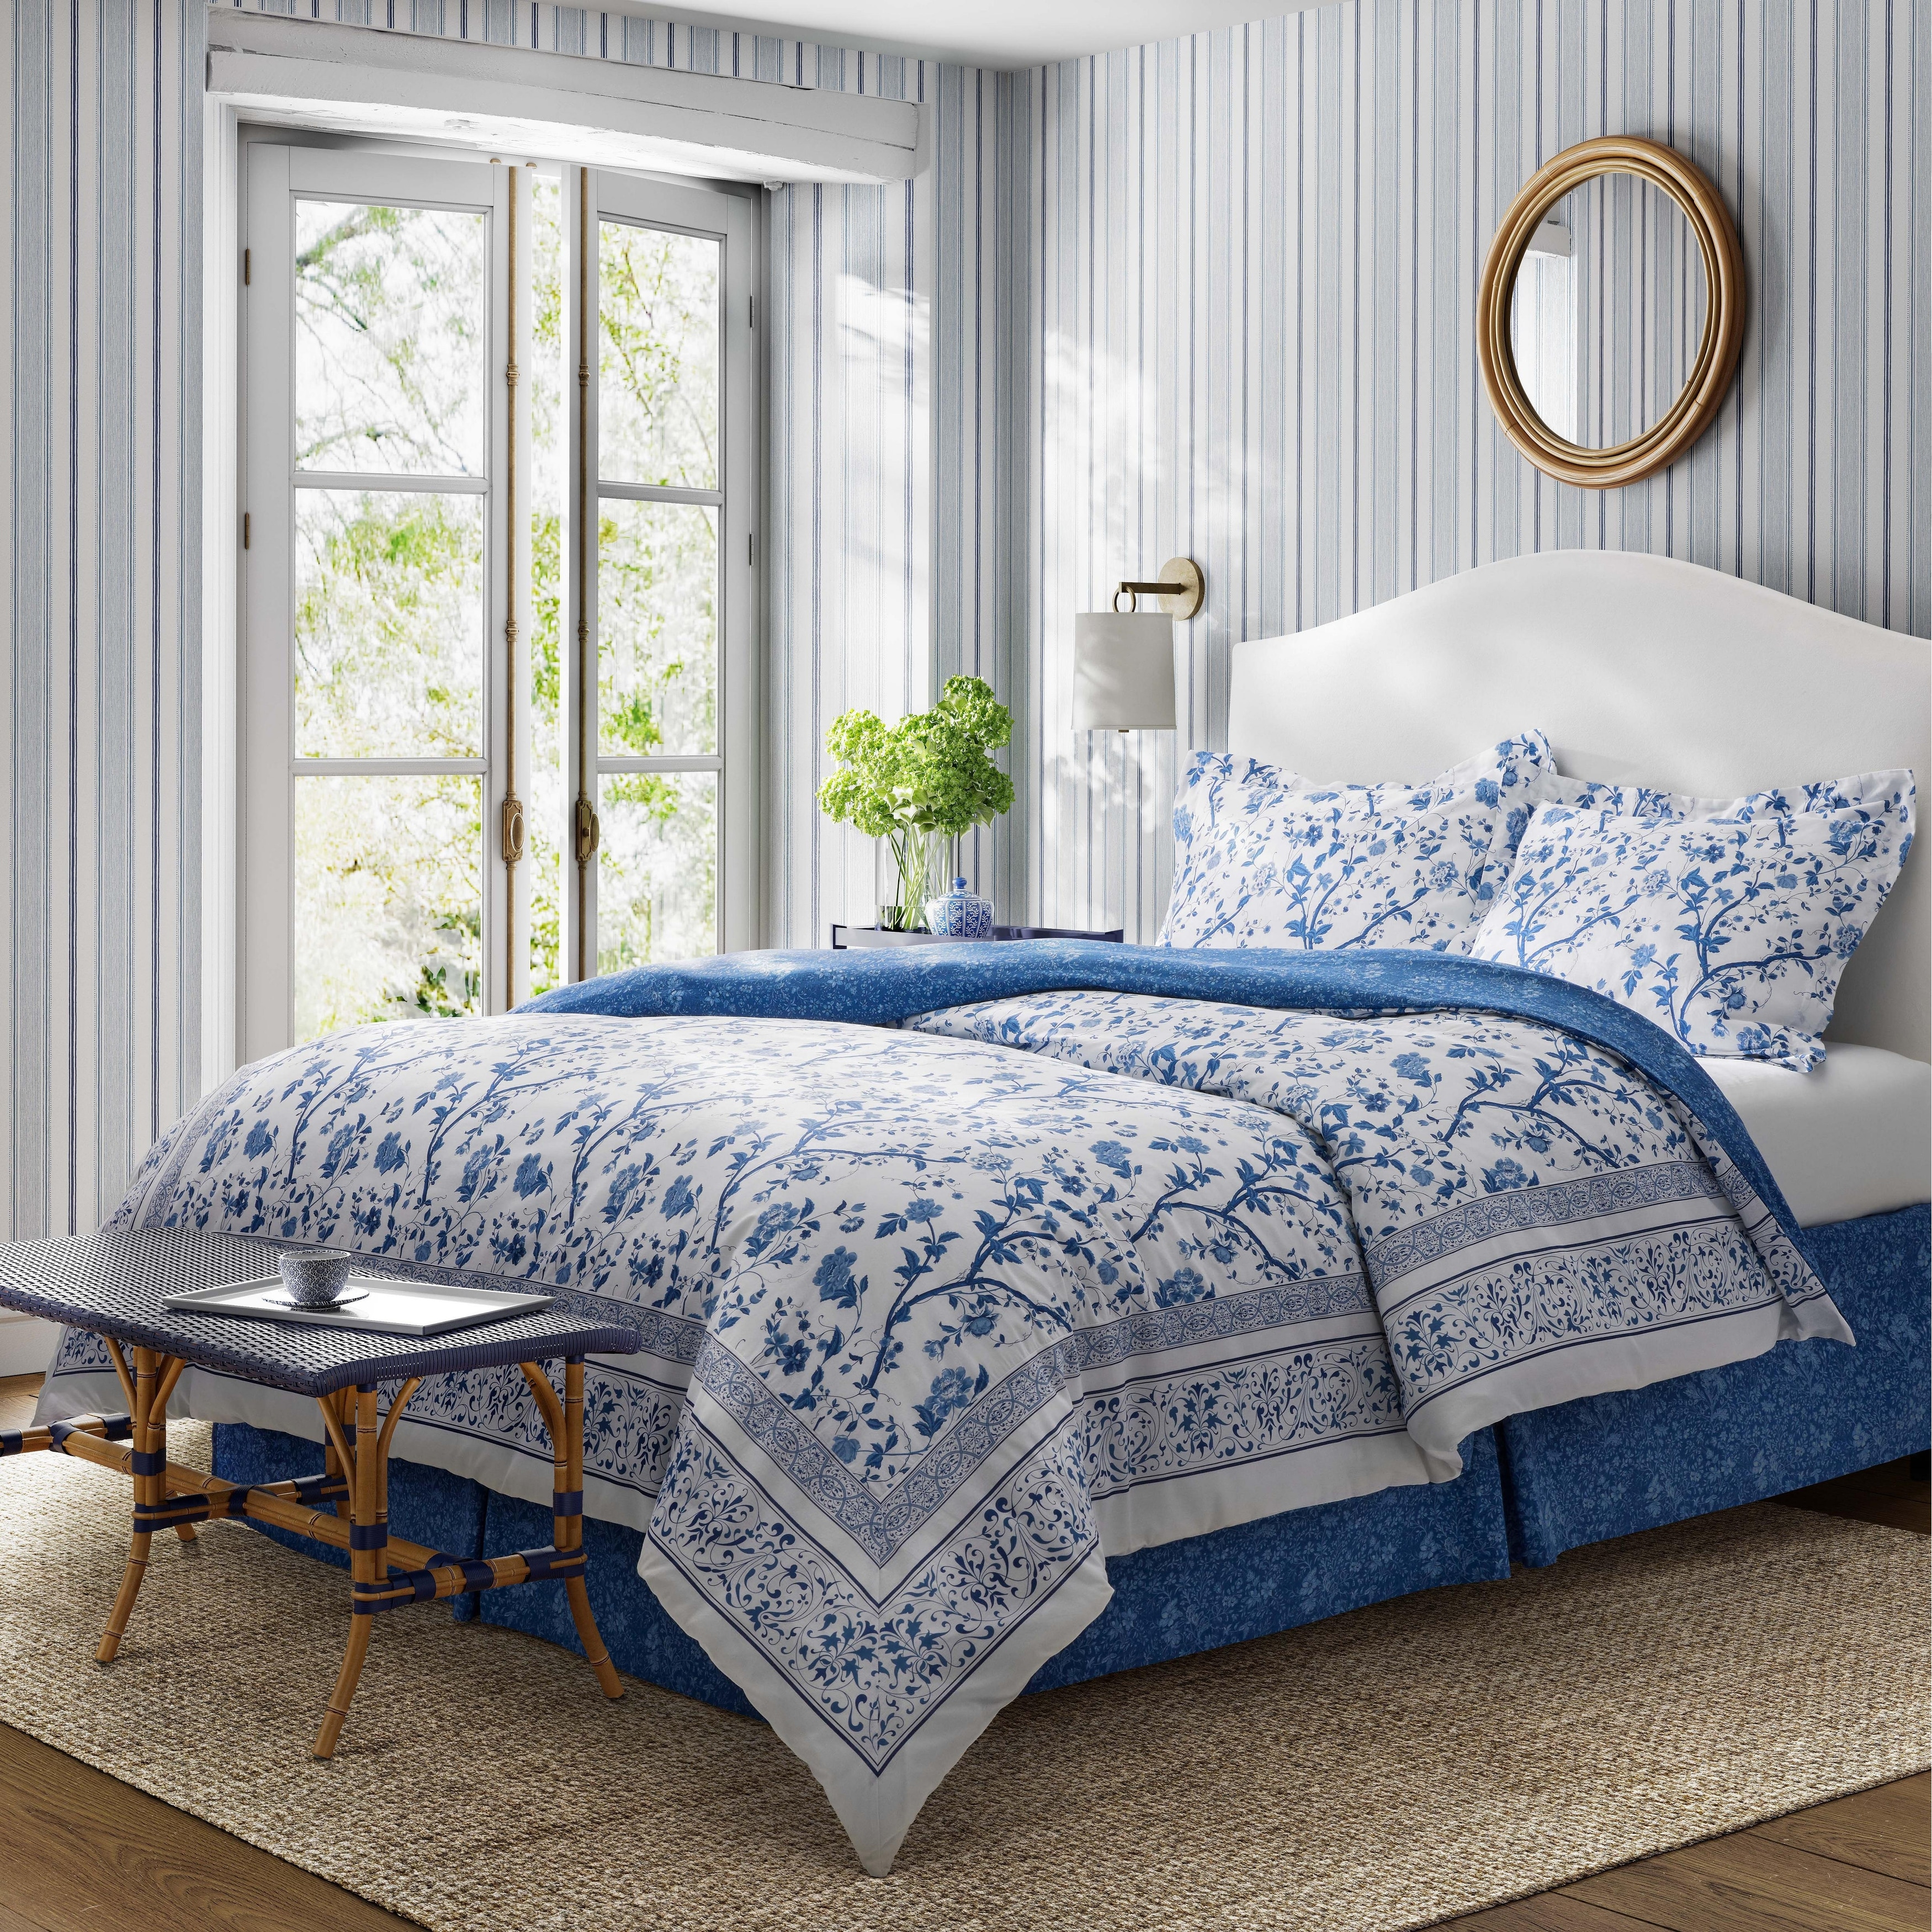 Laura Ashley Comforters and Sets - Bed Bath & Beyond